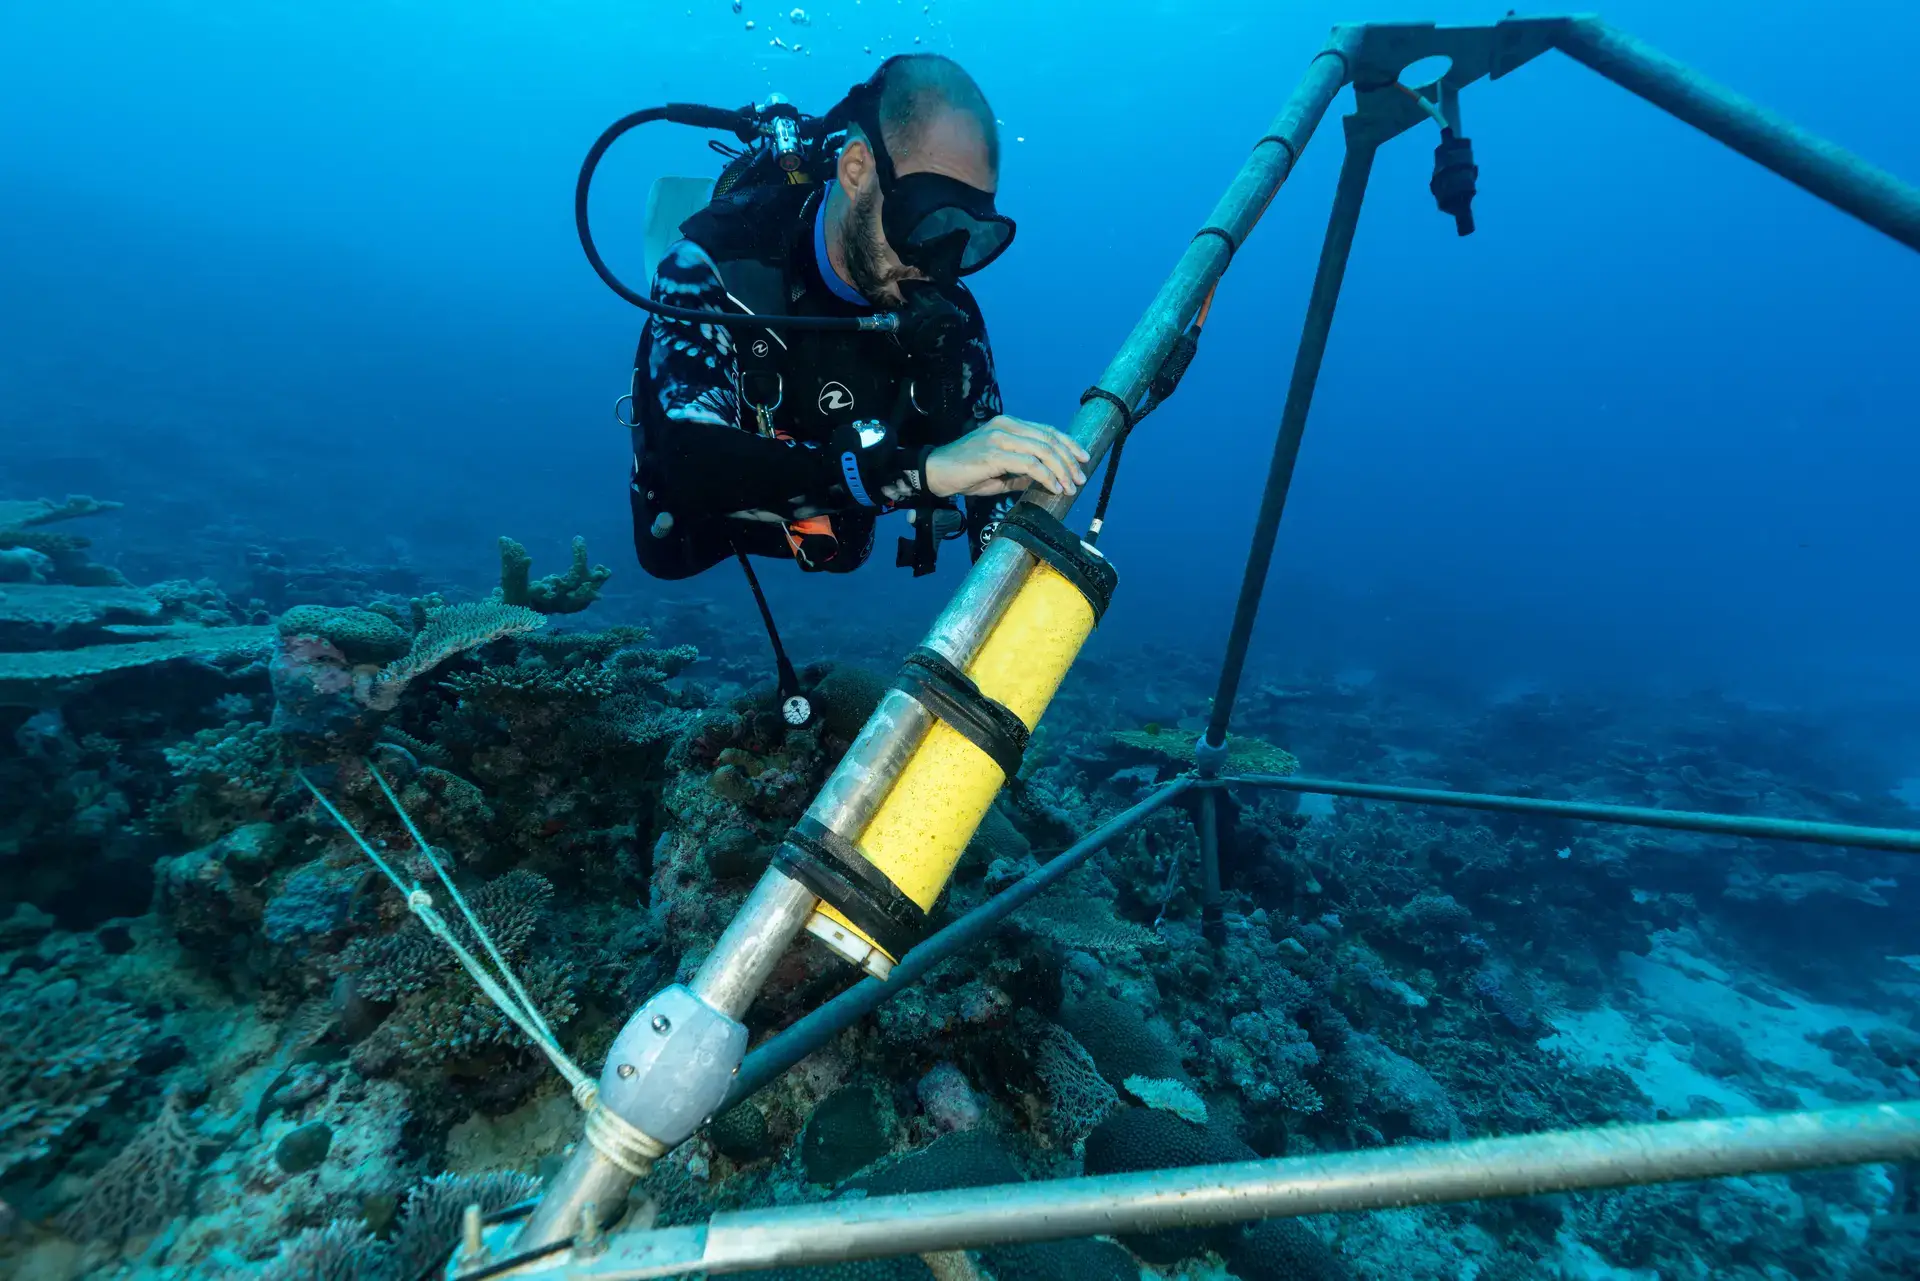 Installation of a tripod by a diver